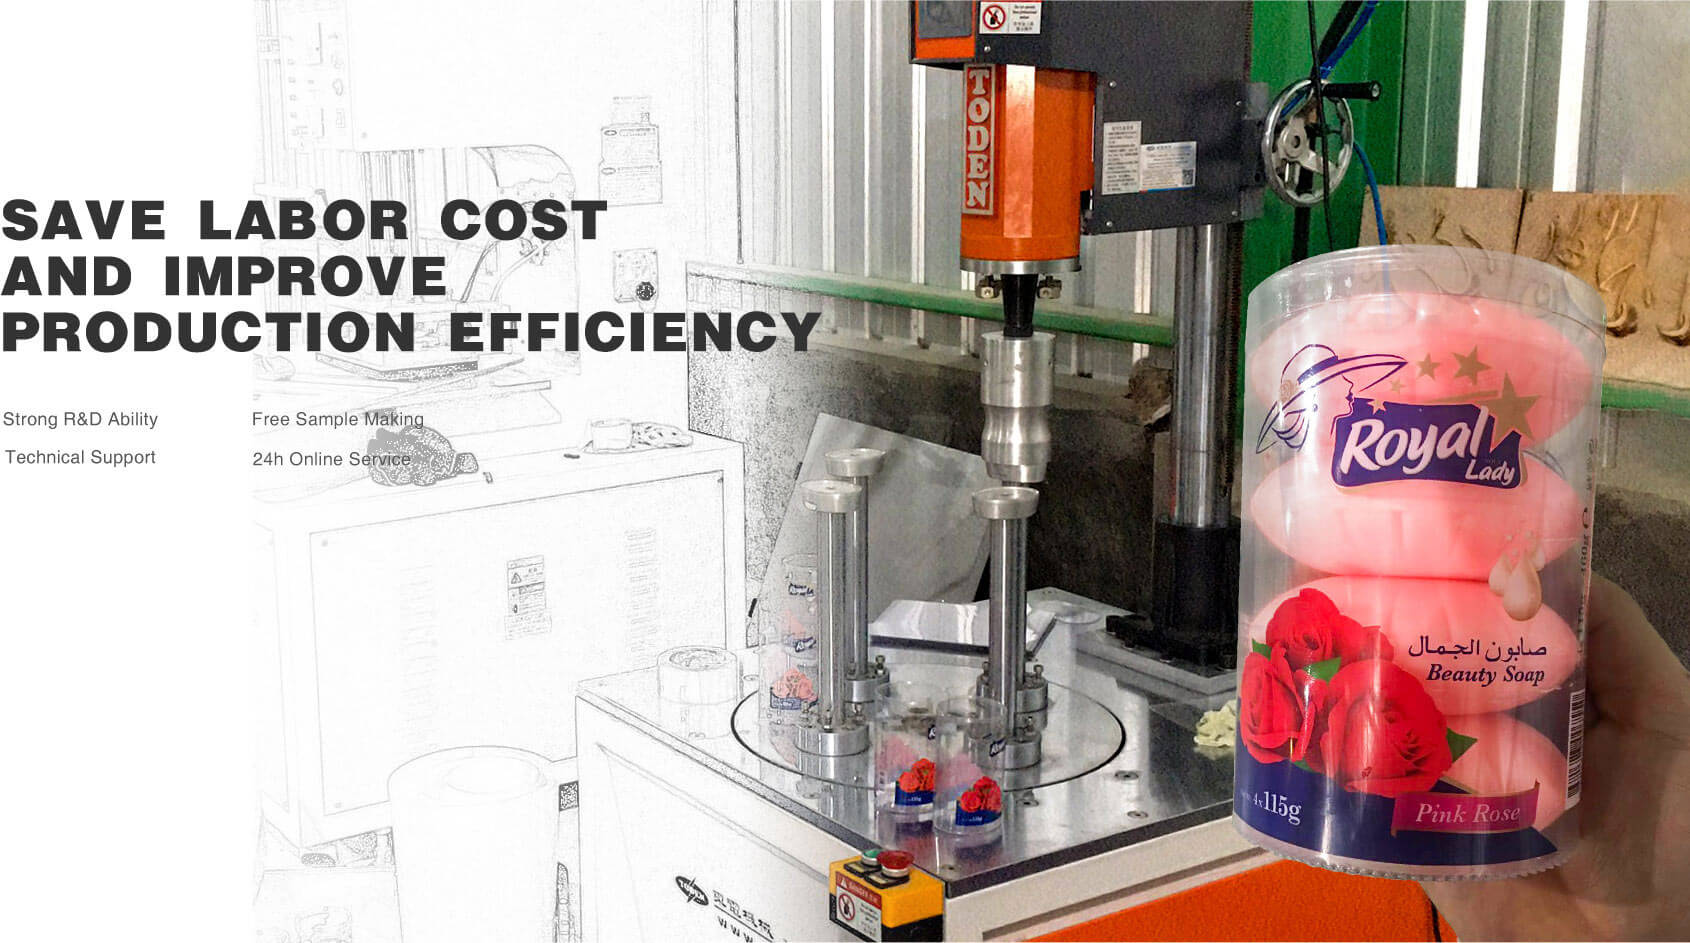 Save labor cost and improve production efficiency